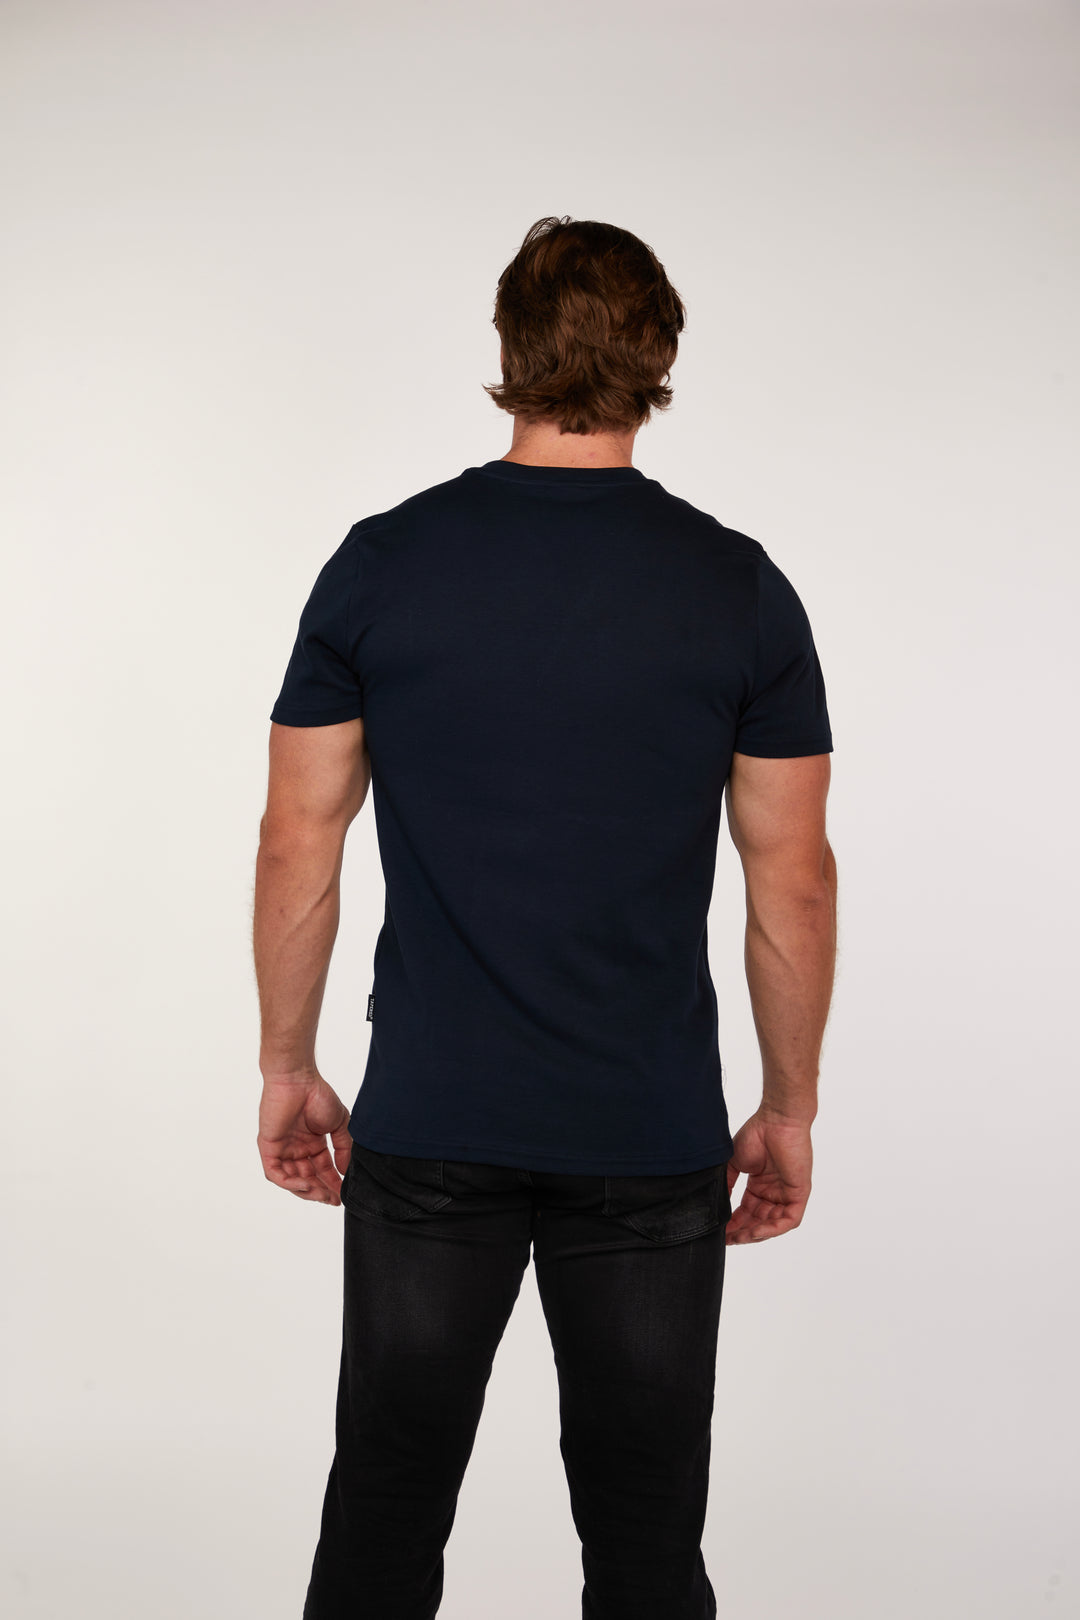 Navy Tapered Fit V-Neck T-Shirt in Short Sleeve. A Proportionally Fitted and Muscle Fit V Neck. The best v neck t-shirt for muscular guys.